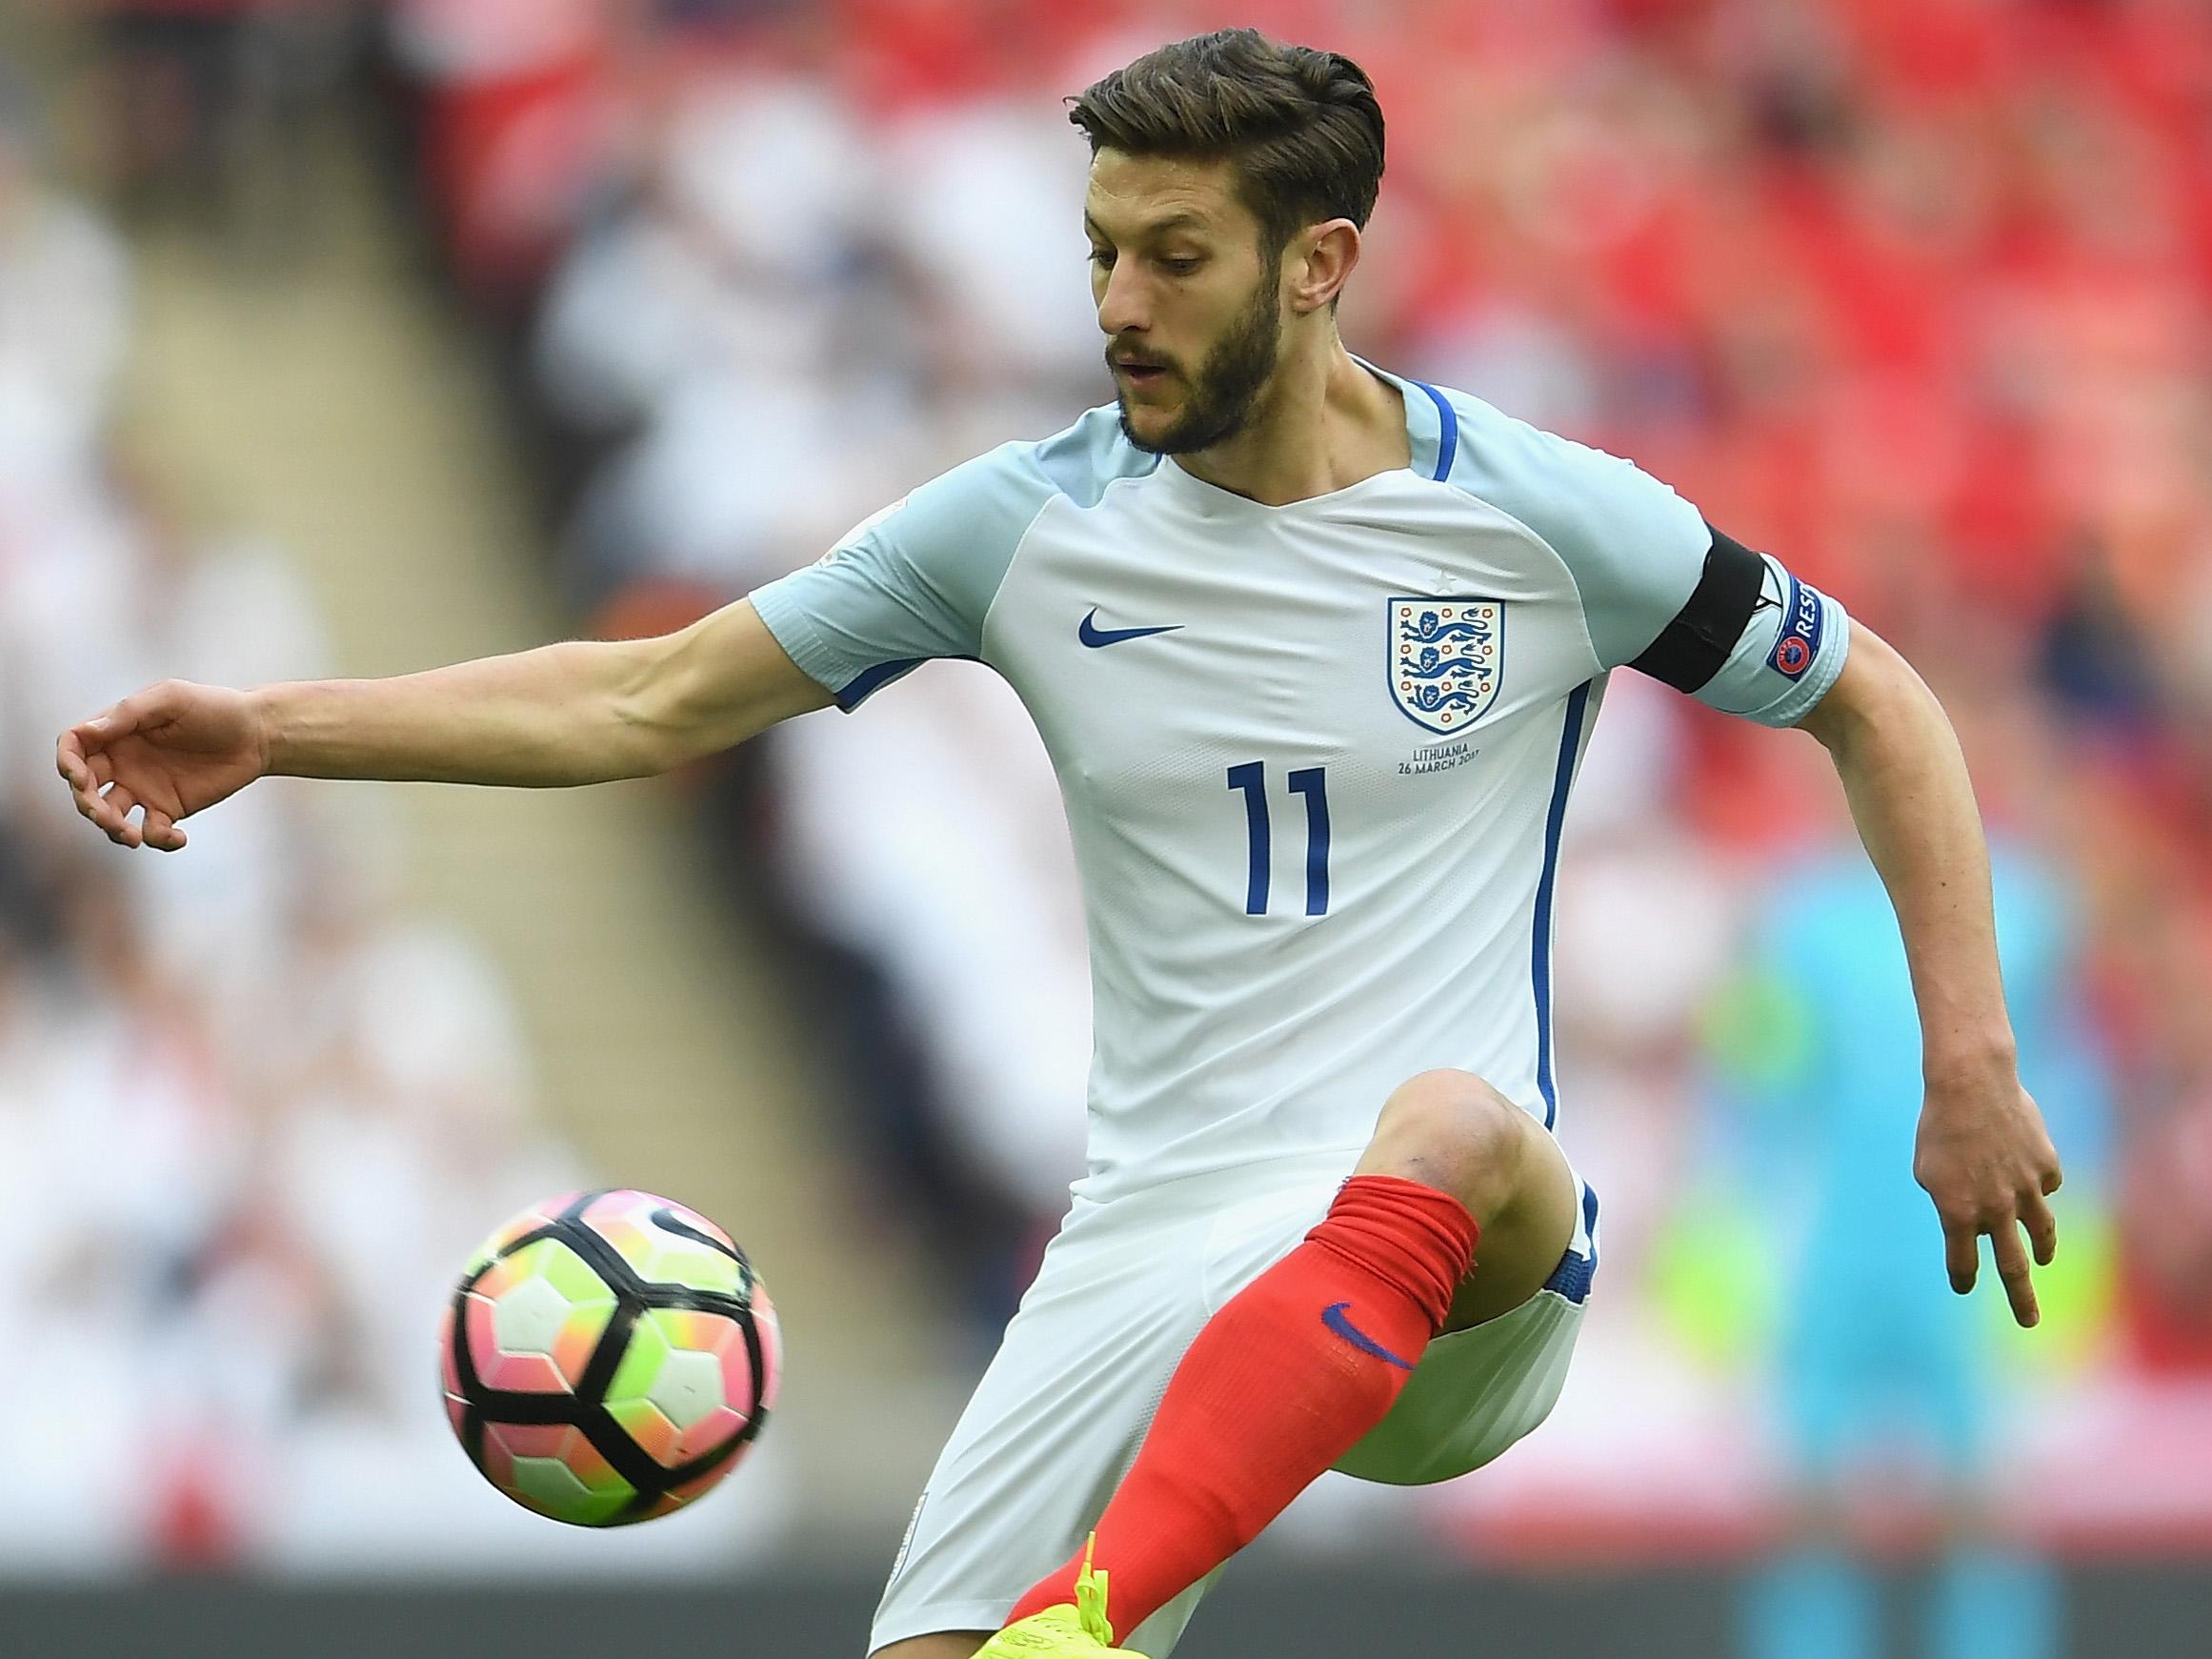 Lallana was injured while on international duty with England